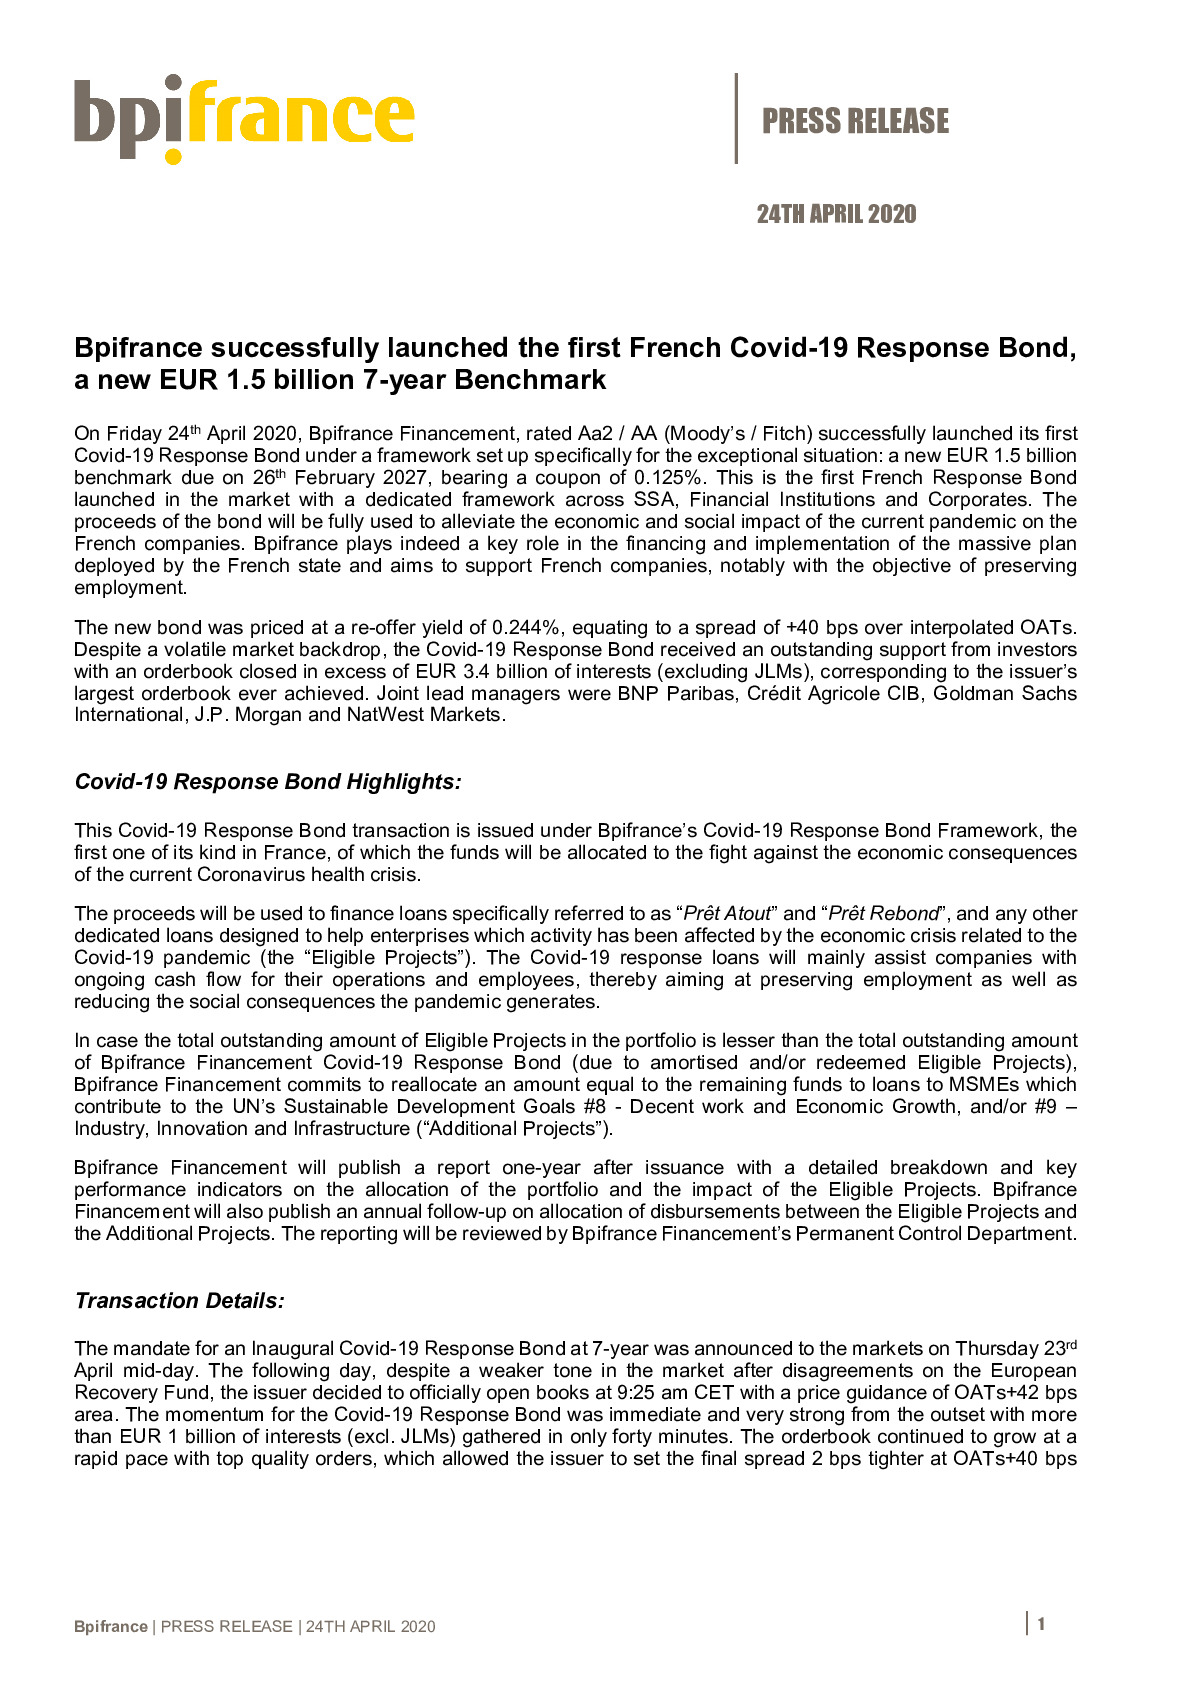 2020 04 24 PR Bpifrance successfully launched its first Covid19 Response Bond 003-pdf